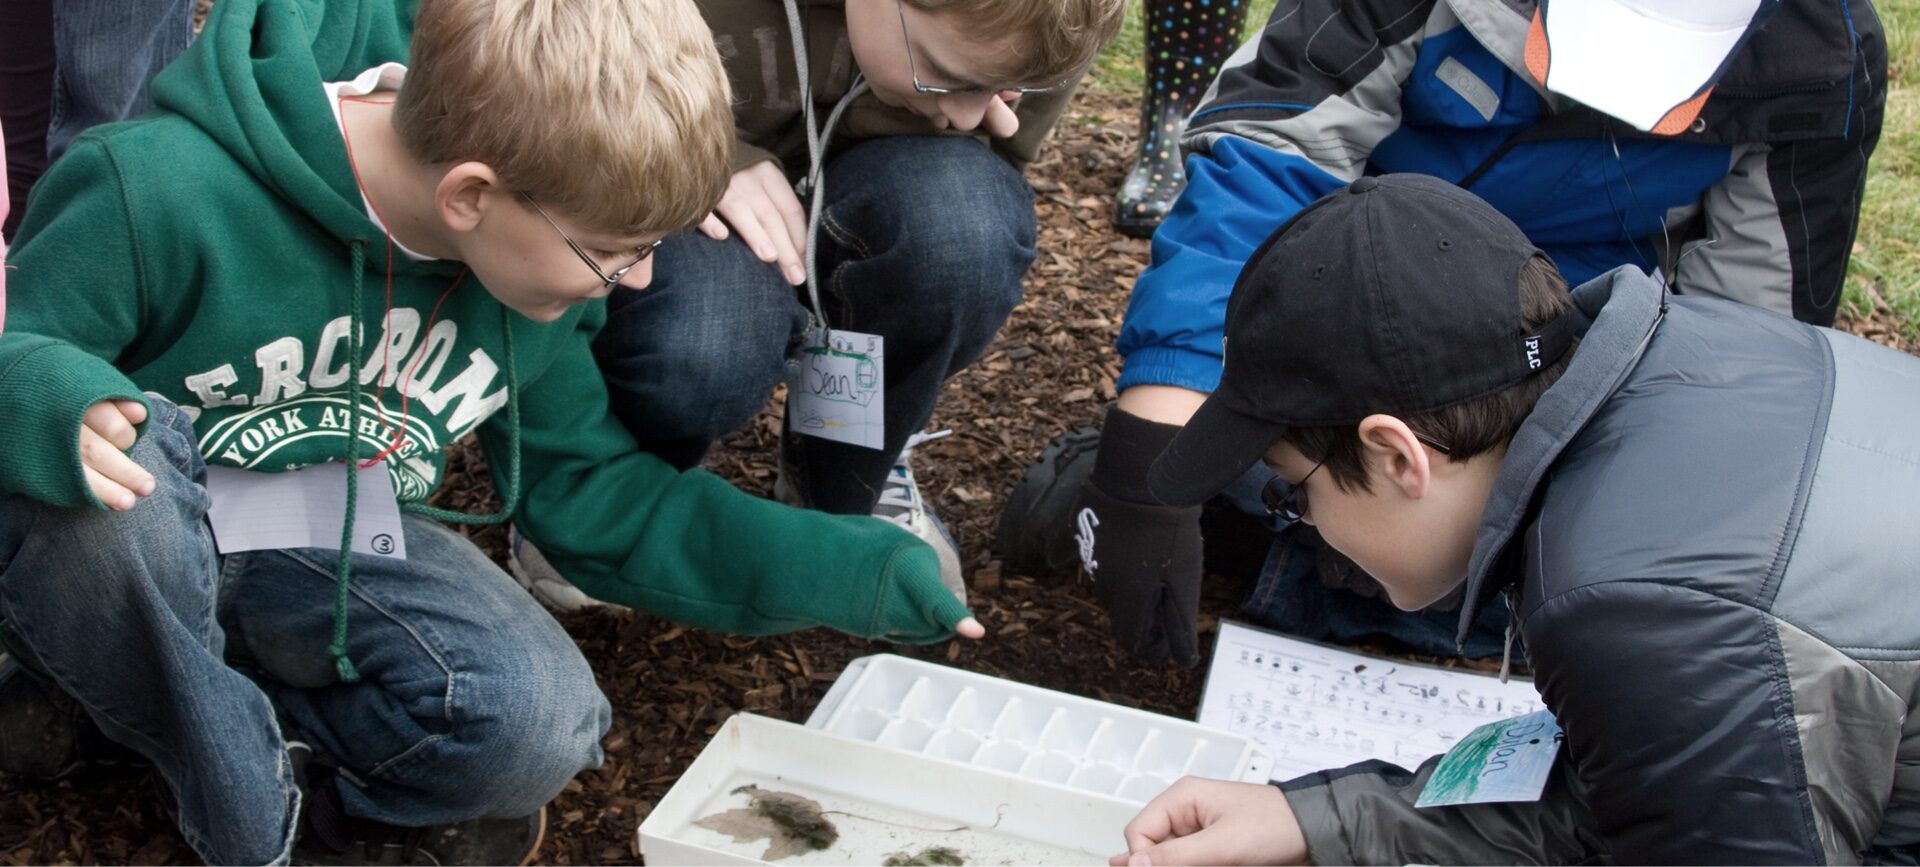 Children knelt on the ground, looking at specimen in a sample of water